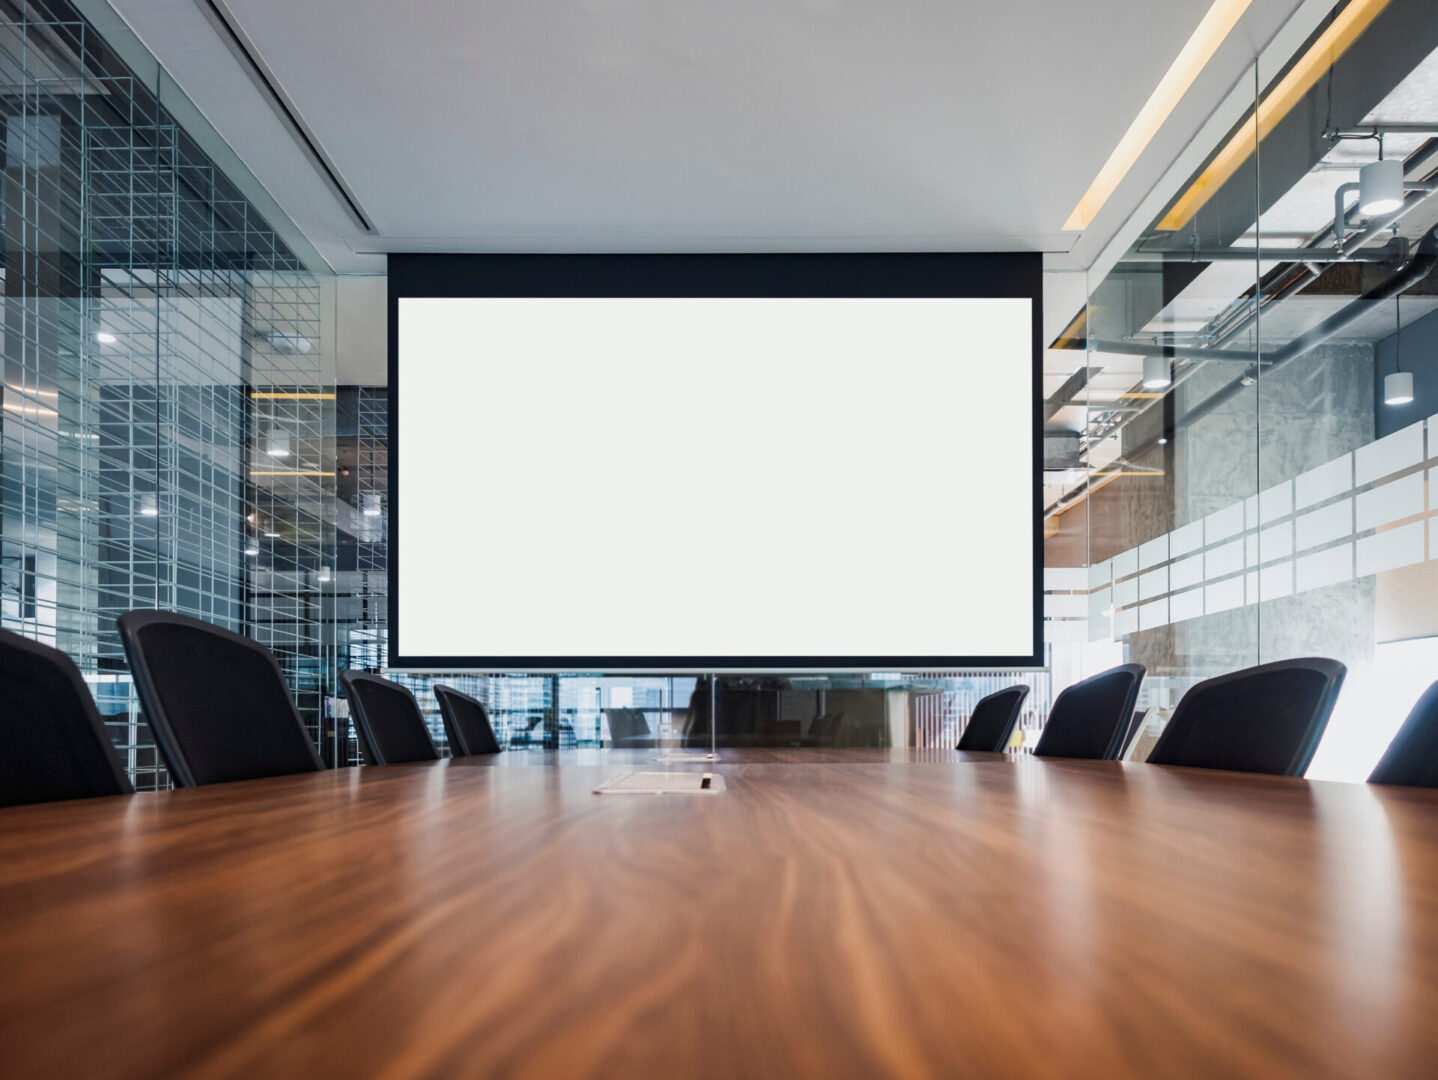 A large screen tv in the middle of a conference room.